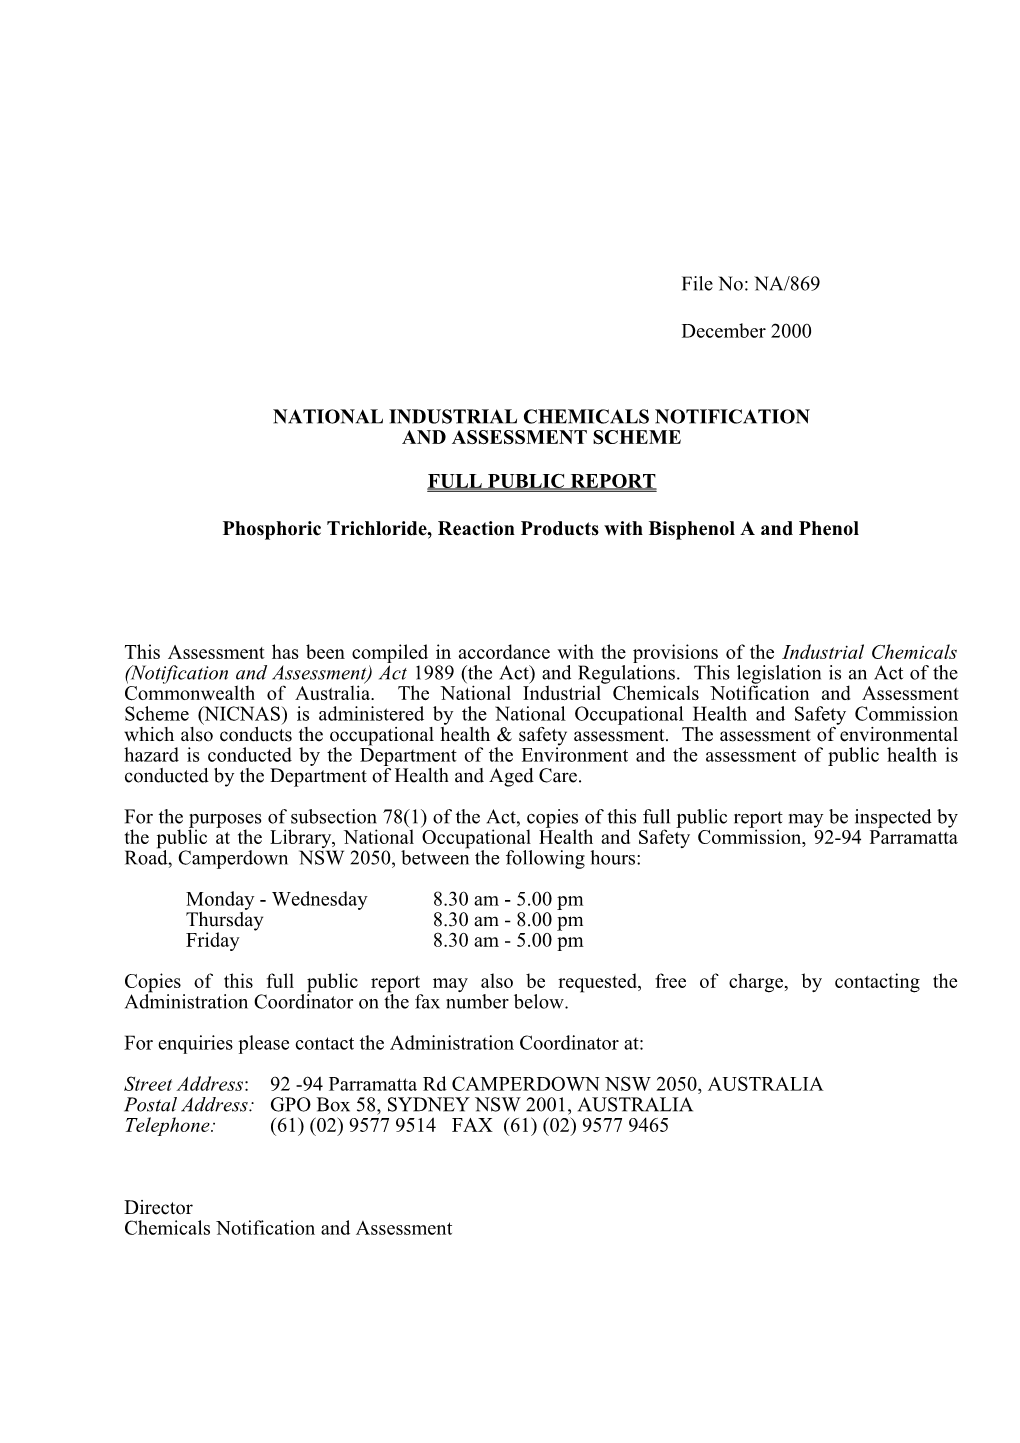 National Industrial Chemicals Notification s2